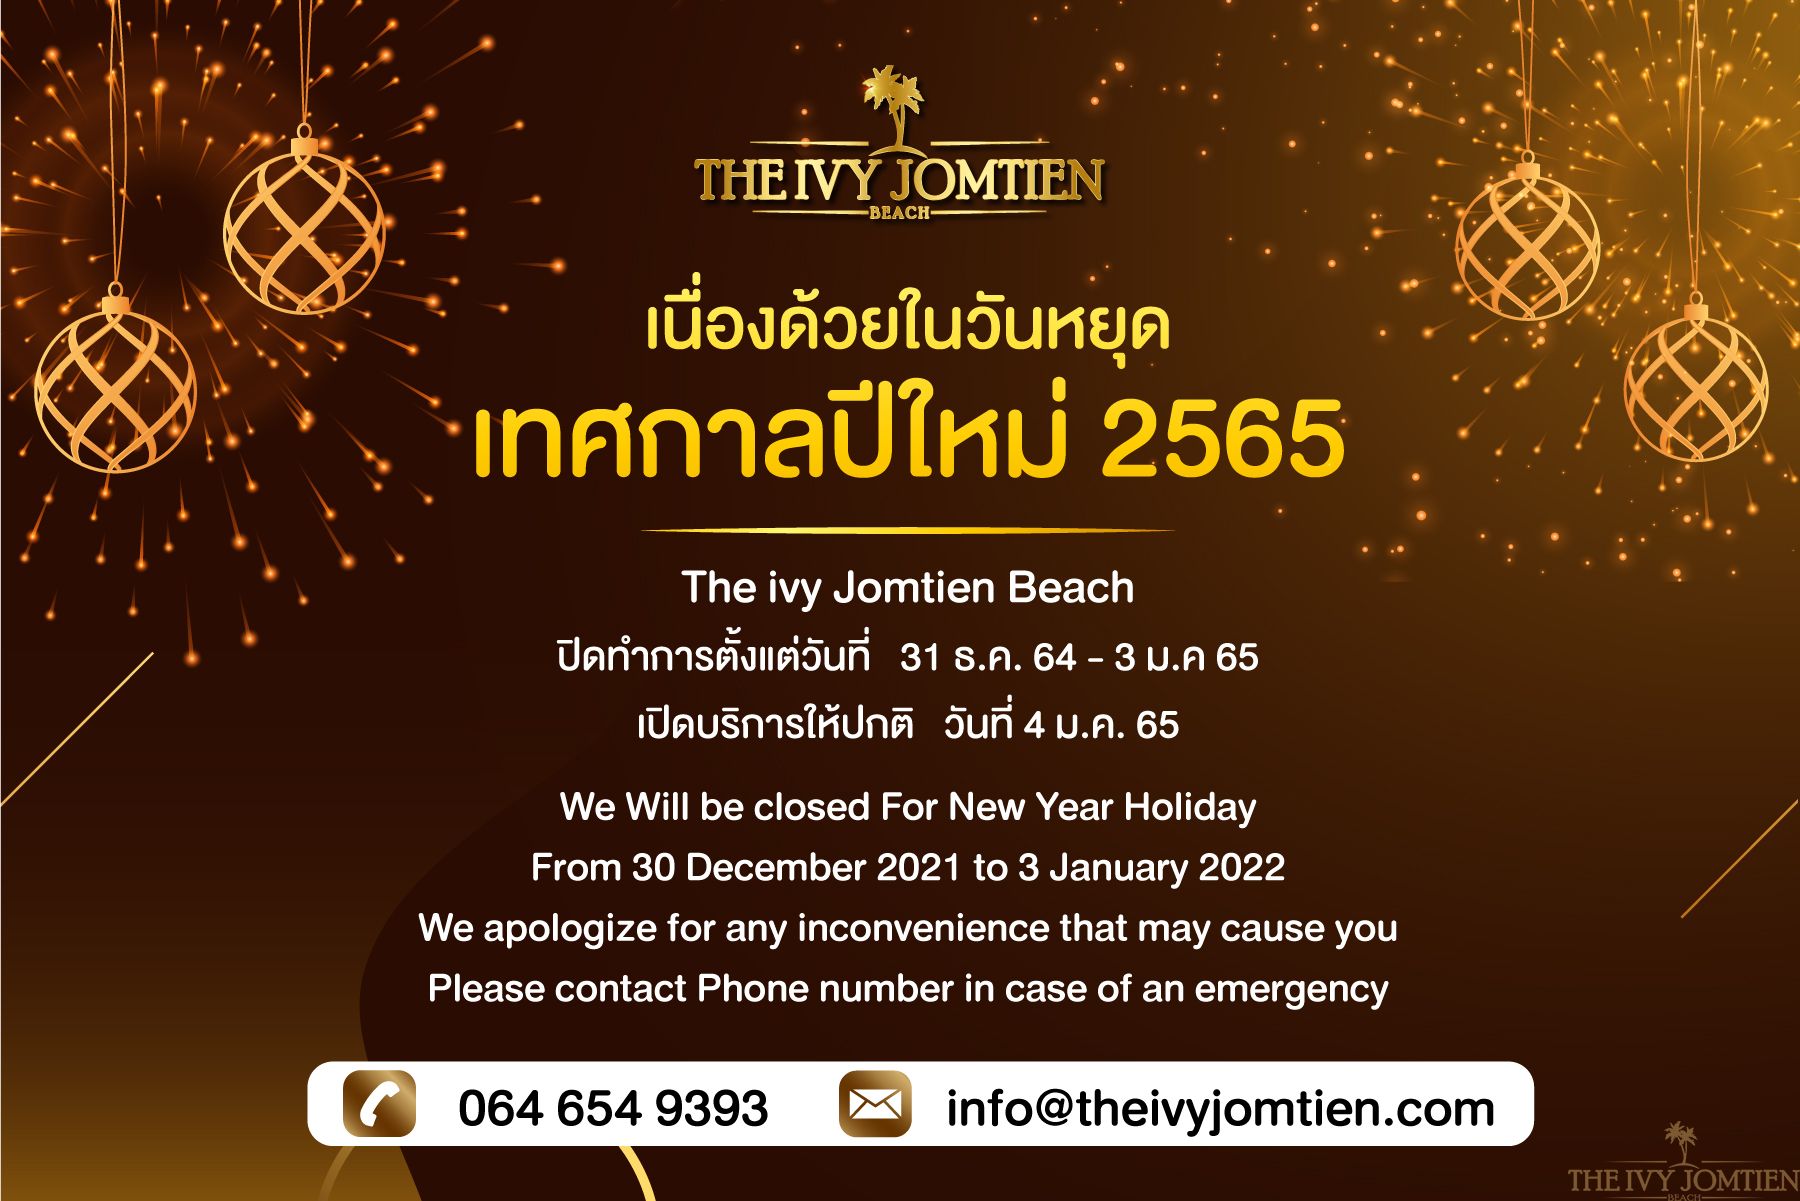 We Will be closed For New Year Holiday From 30 December 2021 to 3 January 2022